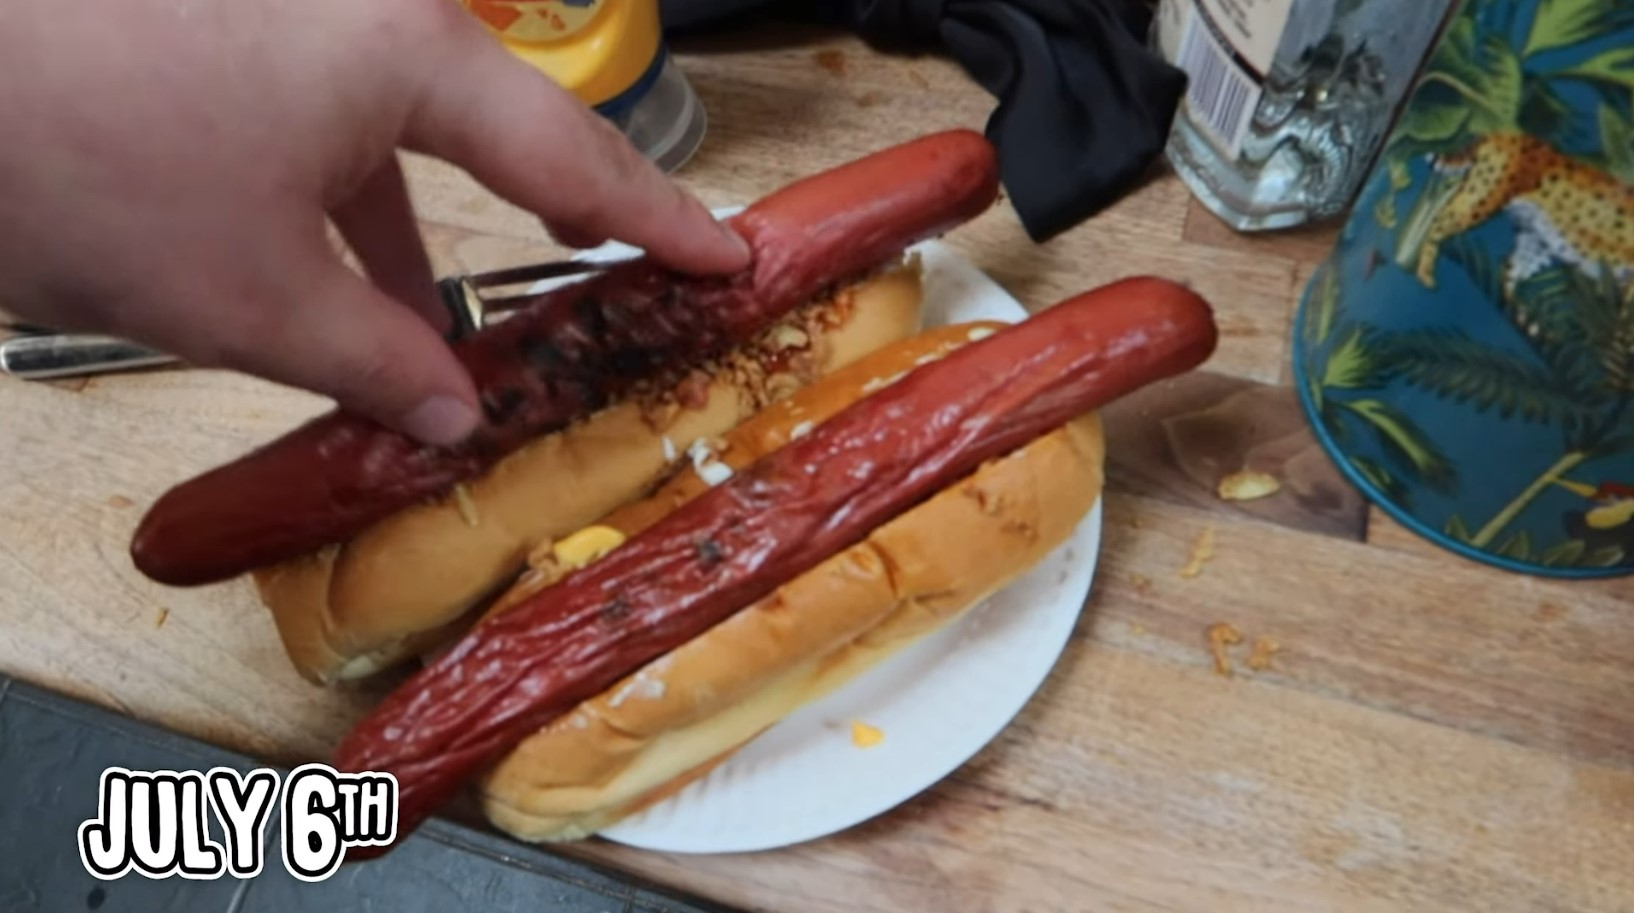 Frame from a video showing TomSka's hand pushing a hot dog sausage into a bun, on top of fried onions and sauces. The picture is captioned "July 6th".